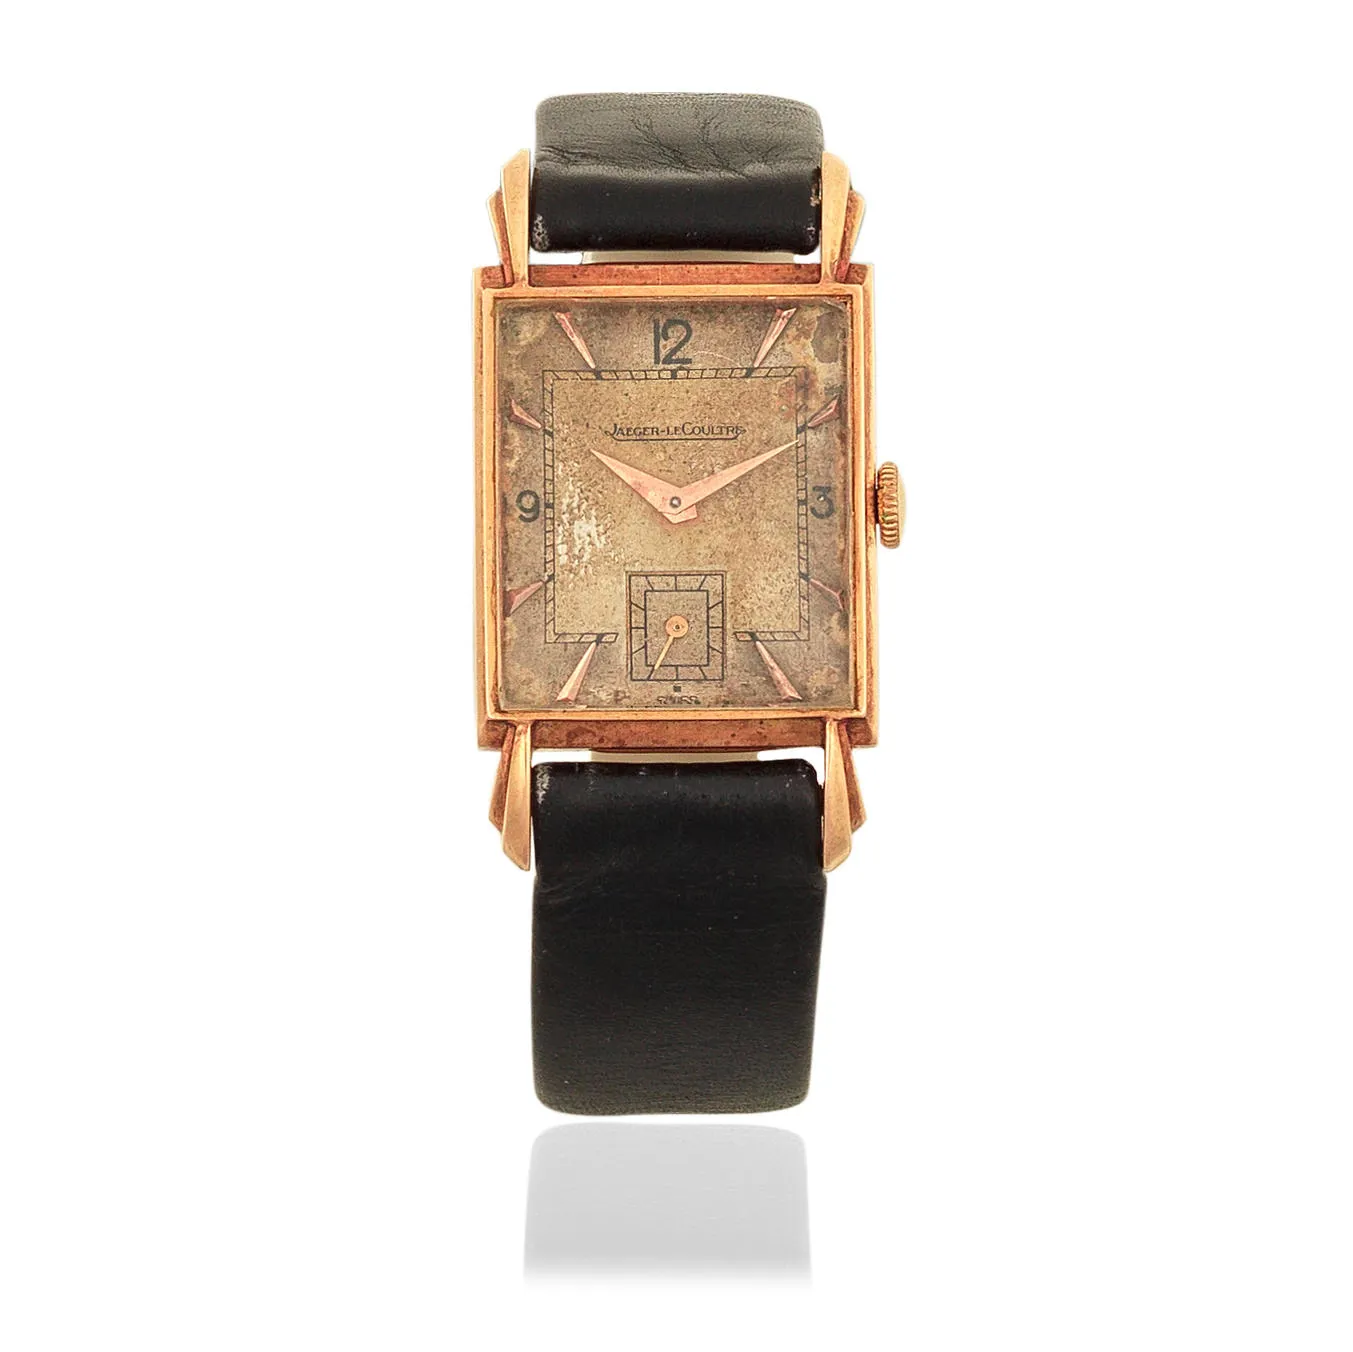 Jaeger-LeCoultre 270.2.62 22mm 18k gold Silvered